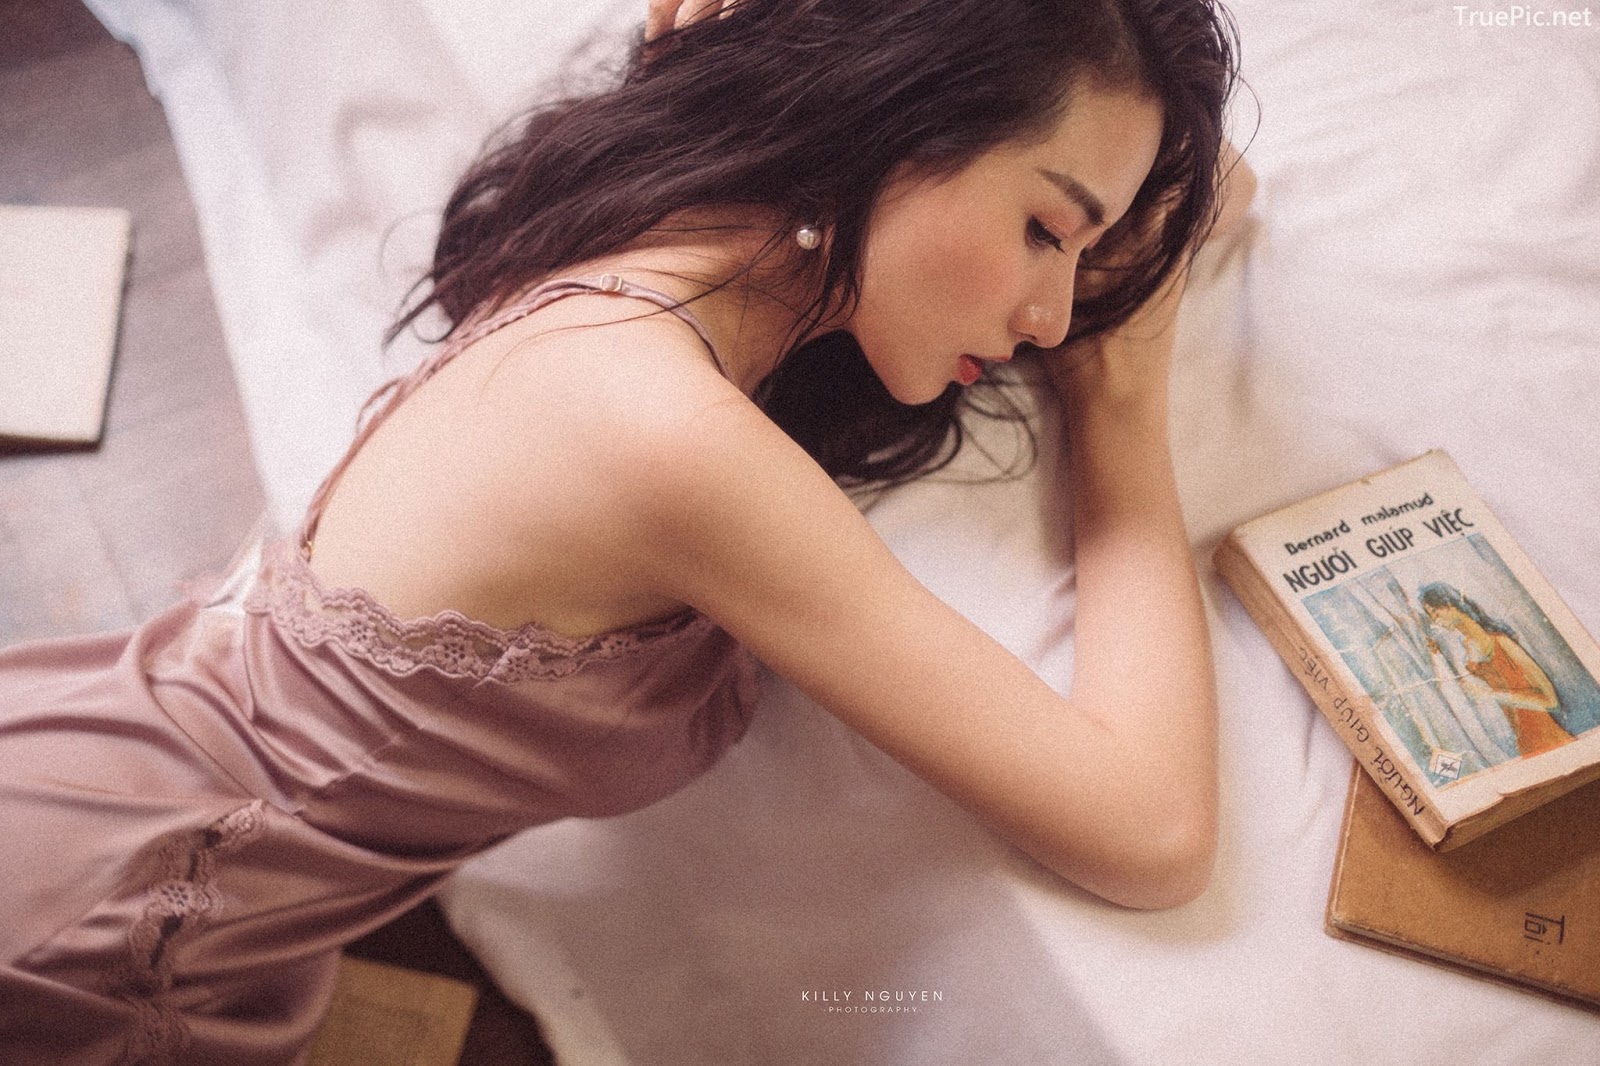 Vietnamese hot model - The beautiful girl in the empty room - Photo by Killy Nguyen - TruePic.net - Picture 13